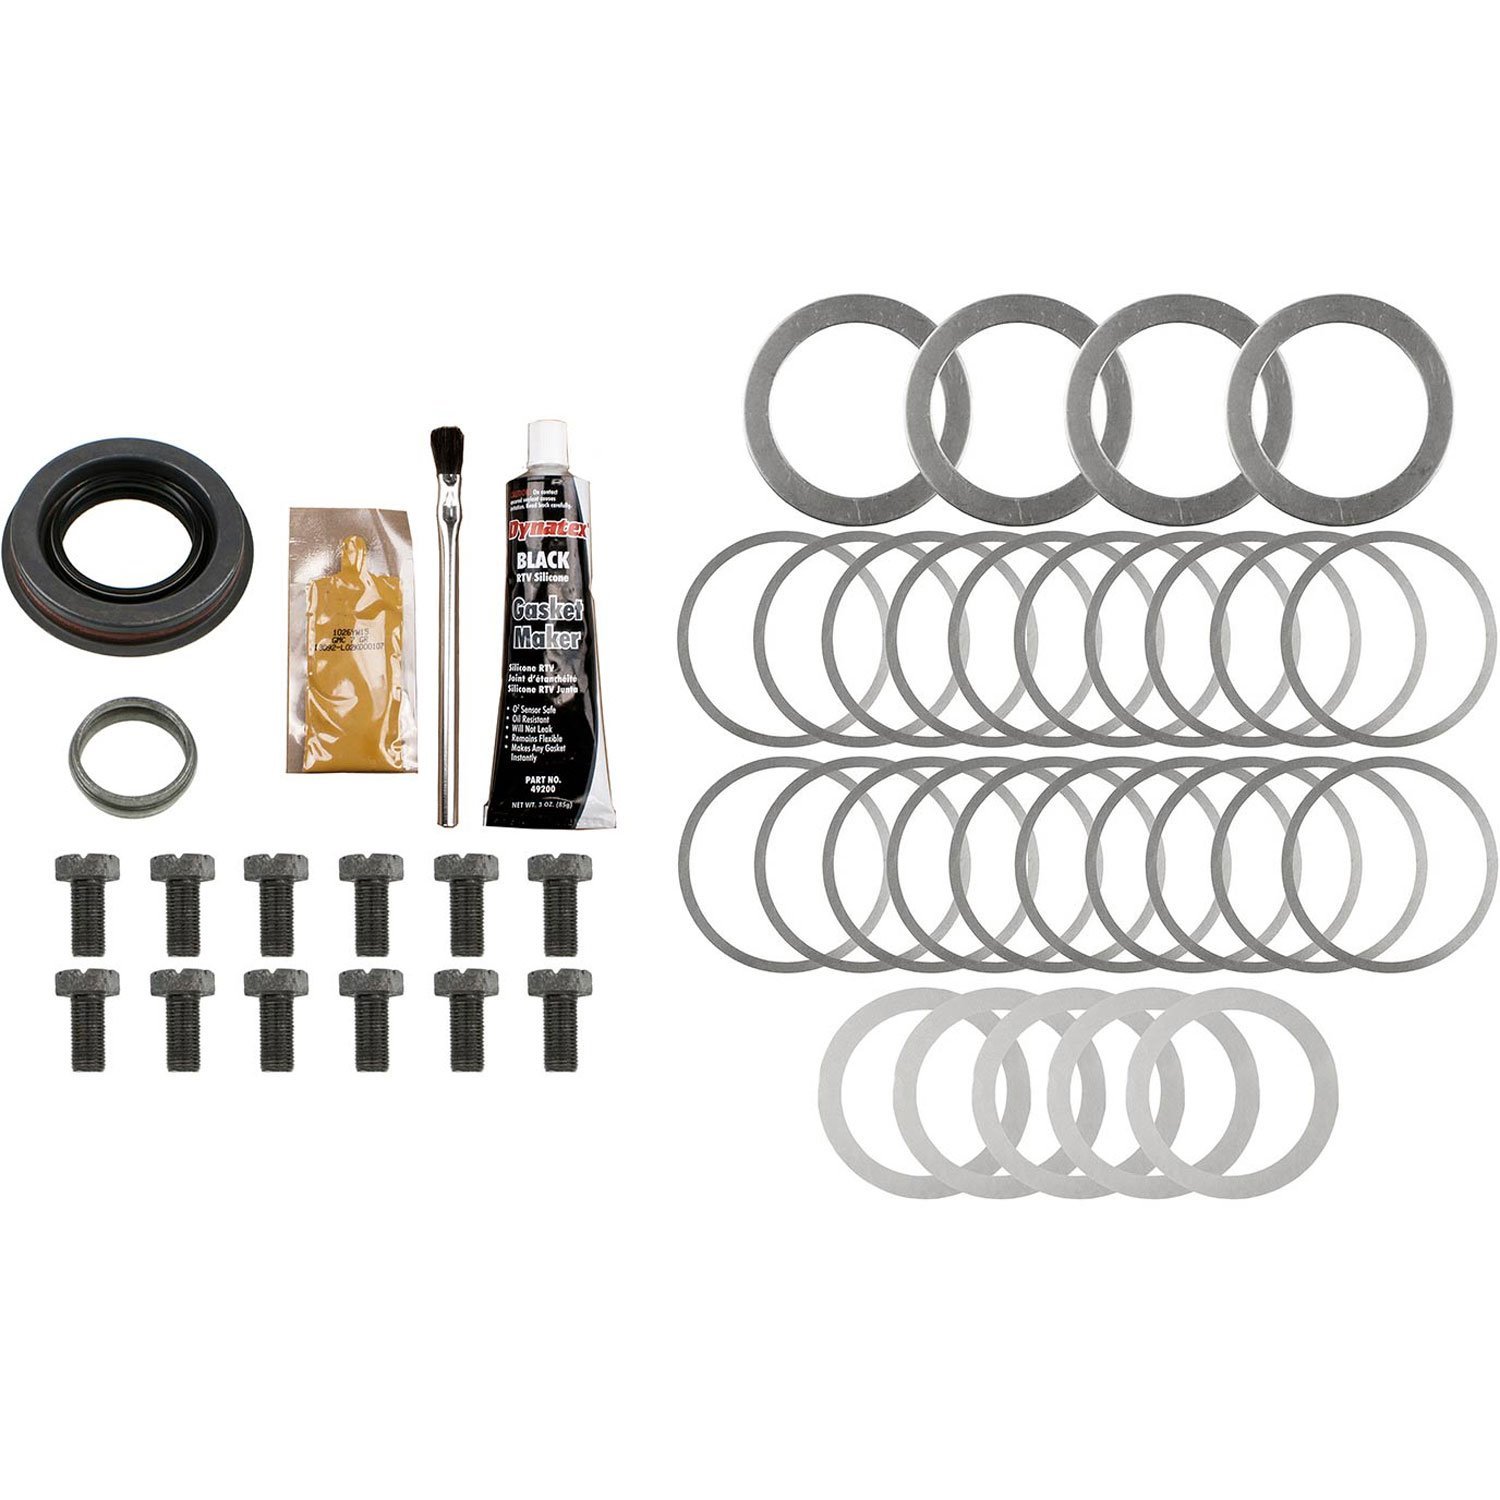 Ring And Pinion Installation Kit; Incl. Pinion-Carrier Shims/Pinion Nut/Ring Gear Bolts/Gear Marking